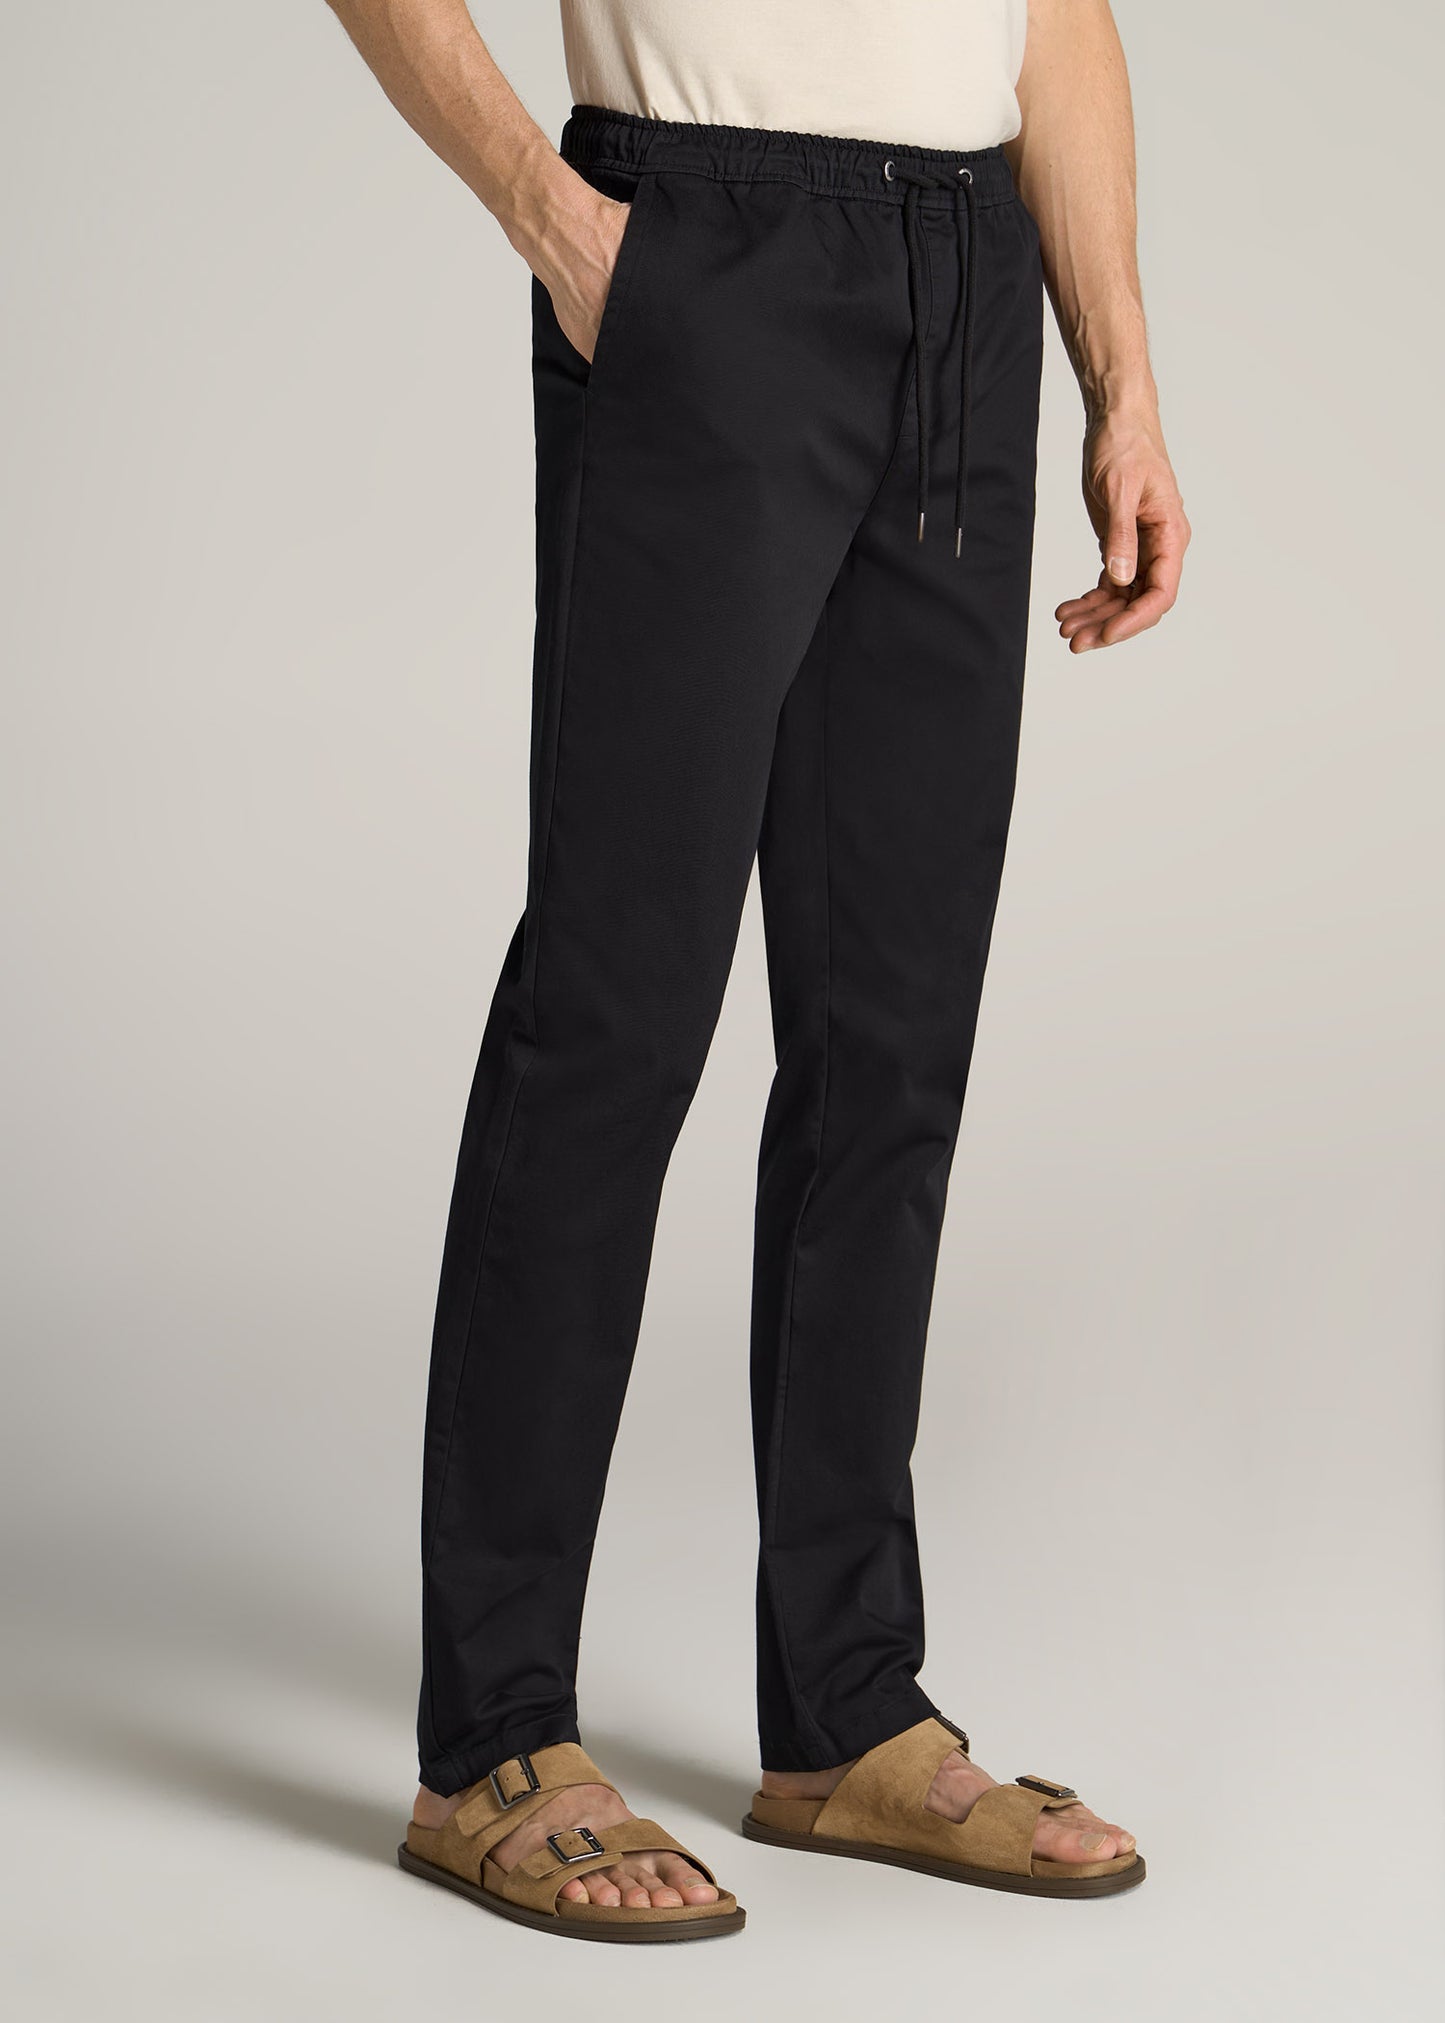 Stretch Pull On TAPERED-FIT Deck Pants For Tall Men in Black